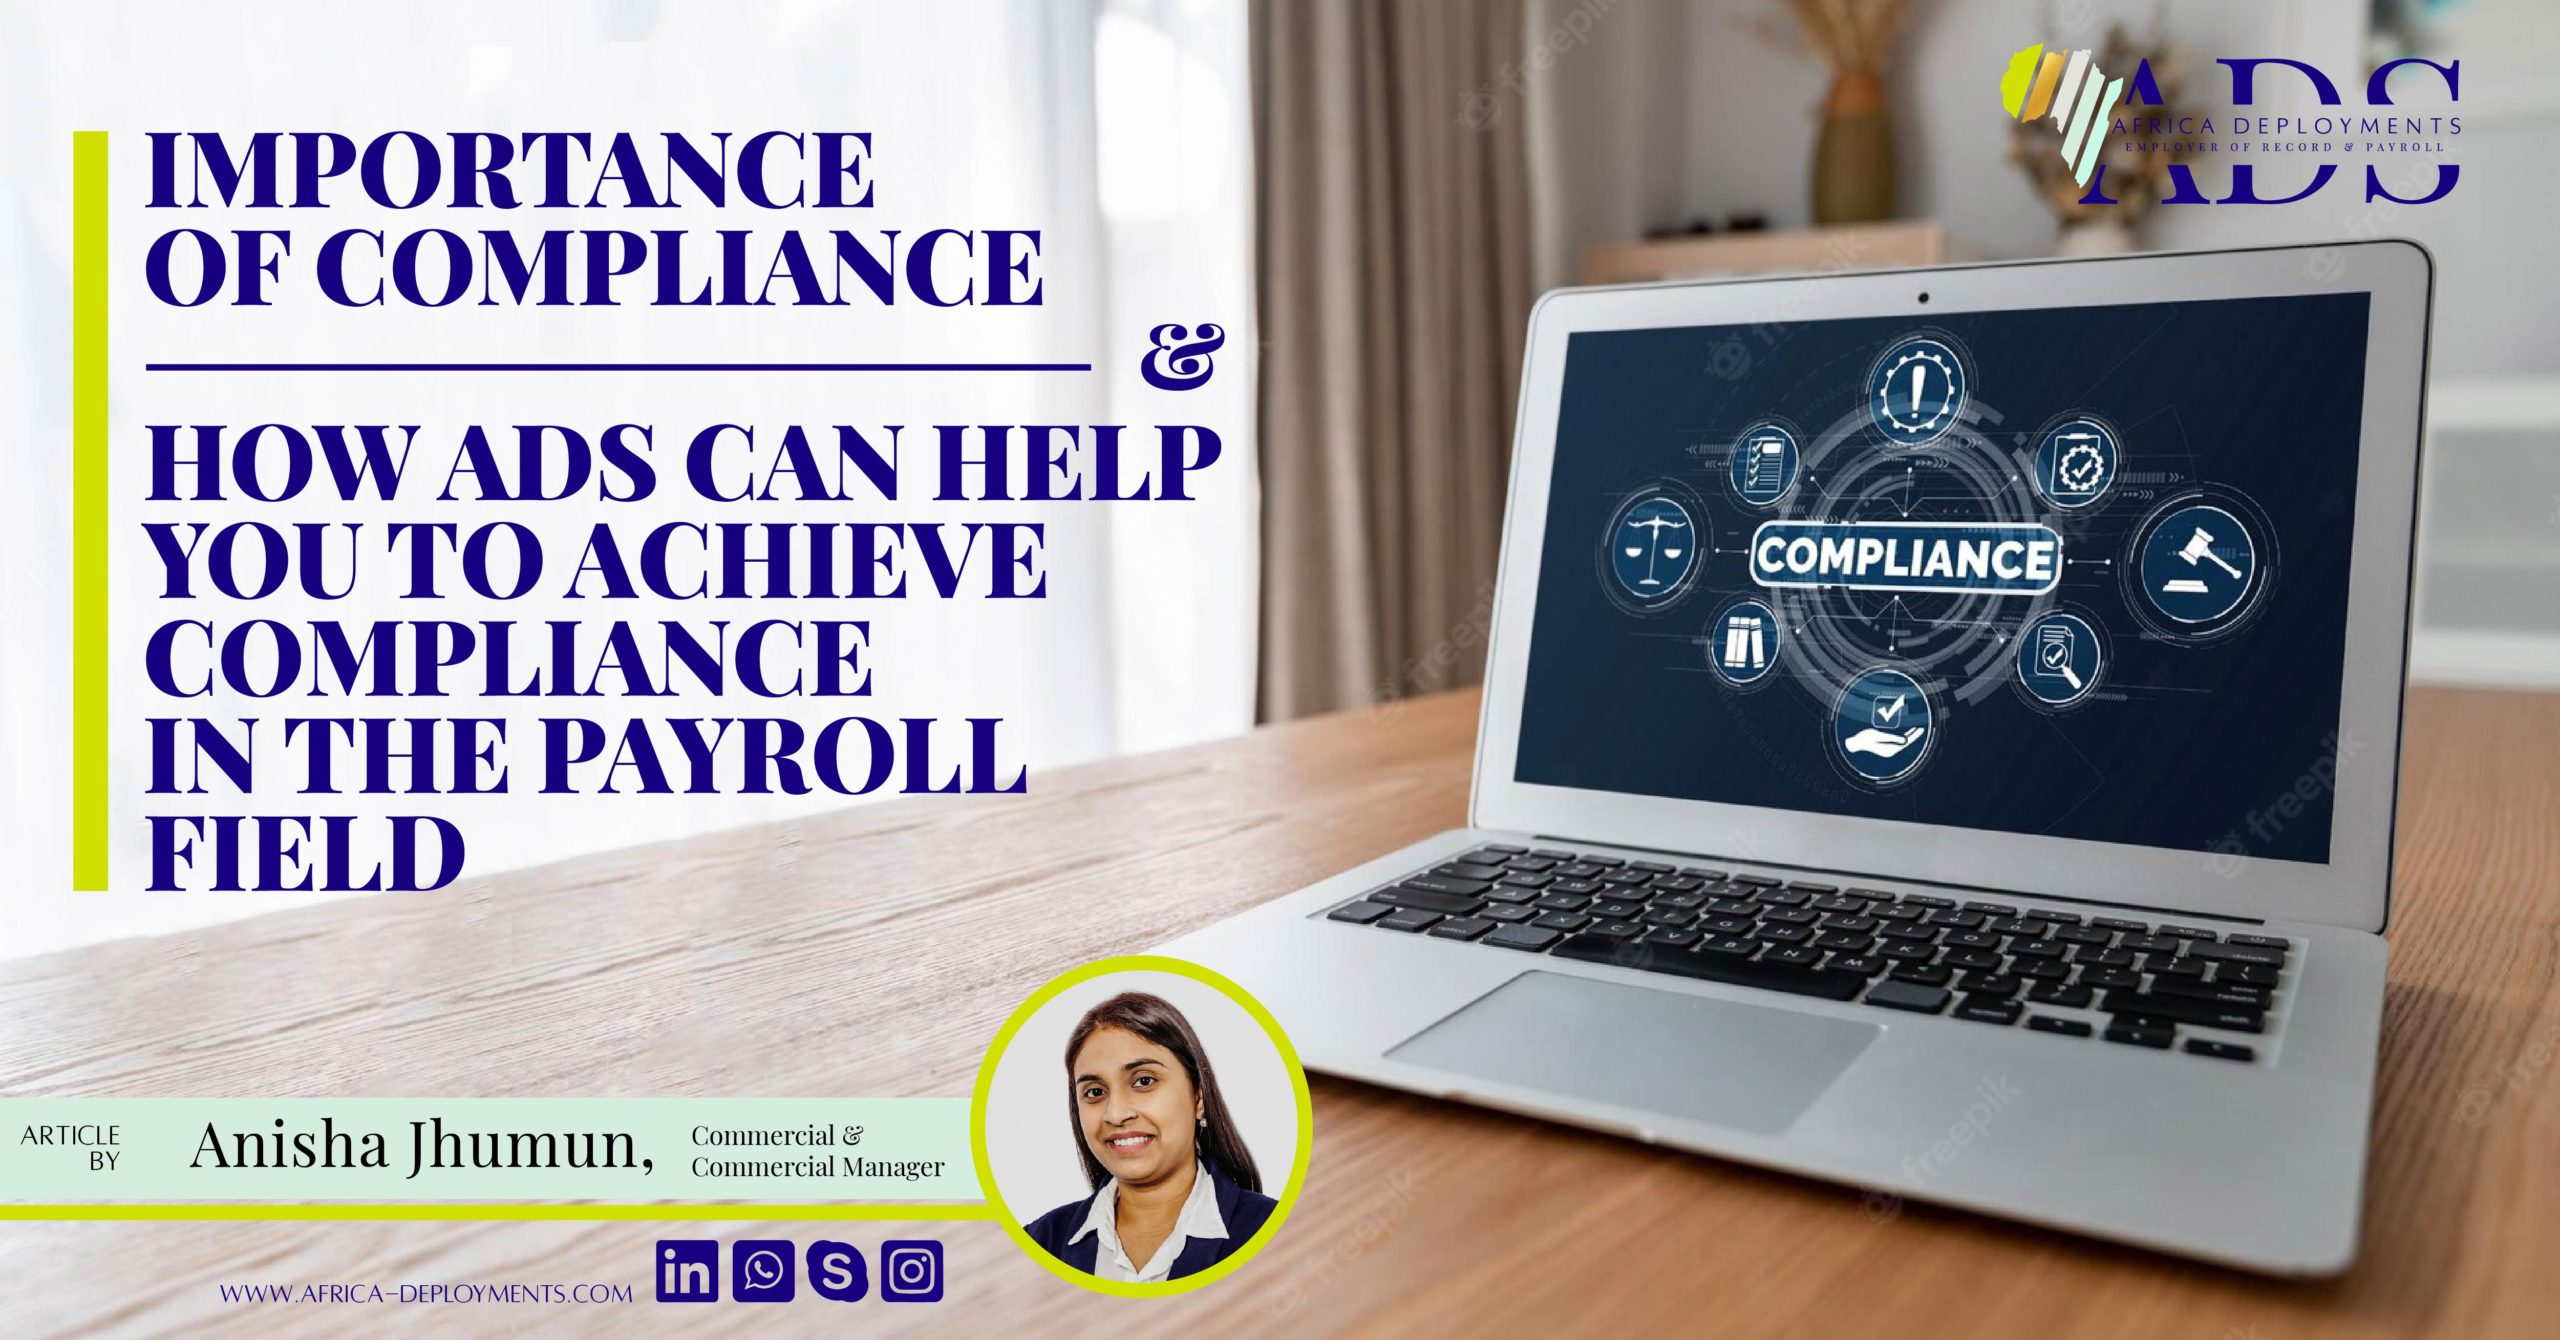 IMPORTANCE OF COMPLIANCE AND HOW ADS CAN HELP YOU TO ACHIEVE COMPLIANCE IN THE PAYROLL FIELD